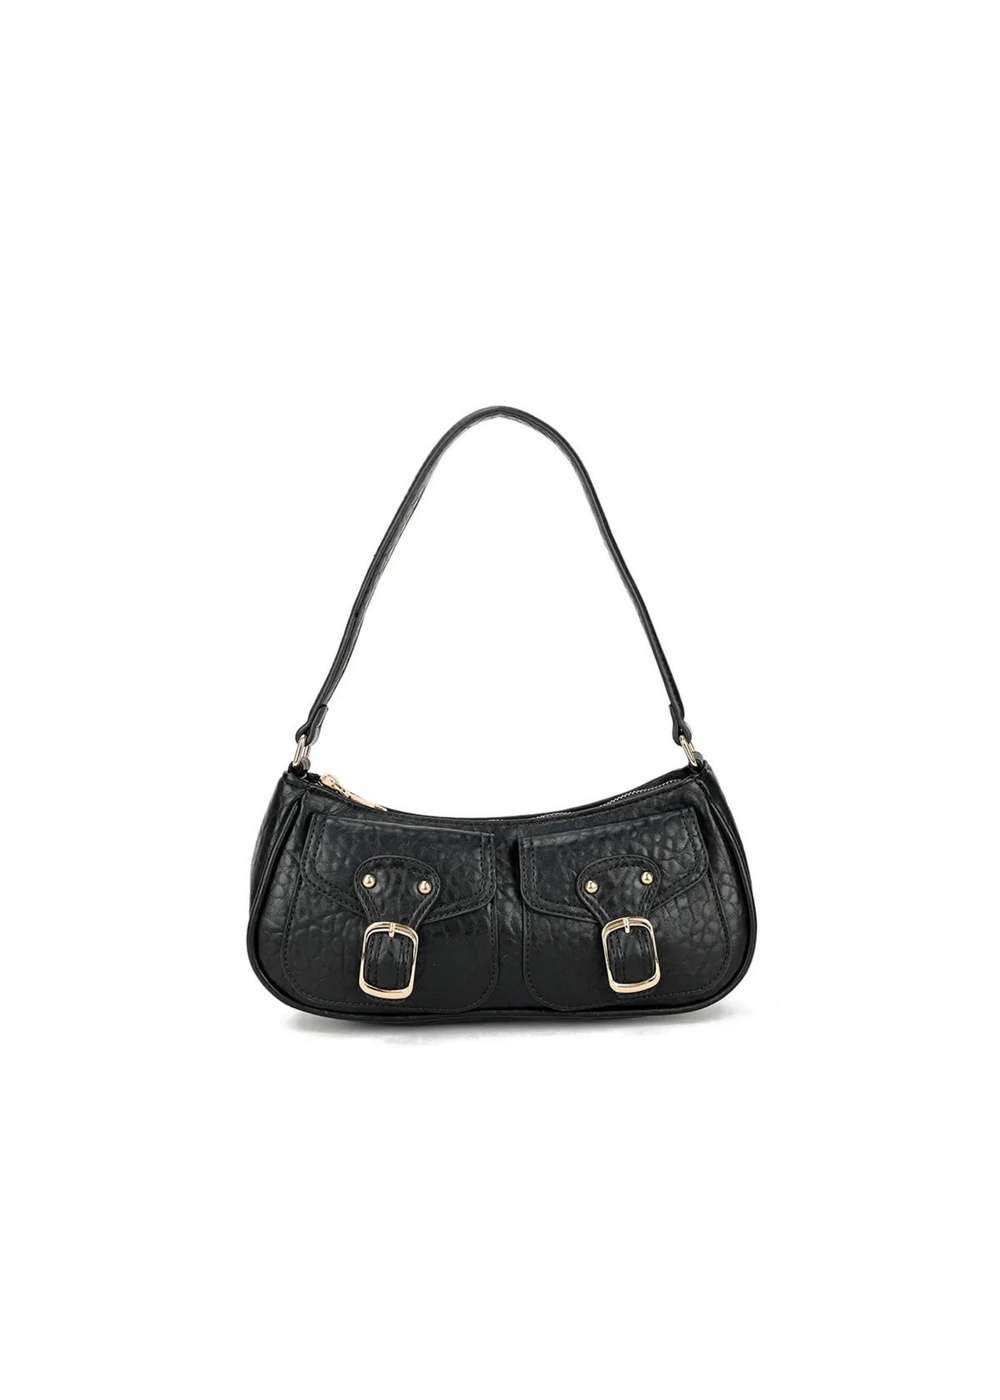 BENNE SATCHEL WITH GOLD BUCKLES IN BLACK FAUX LEATHER